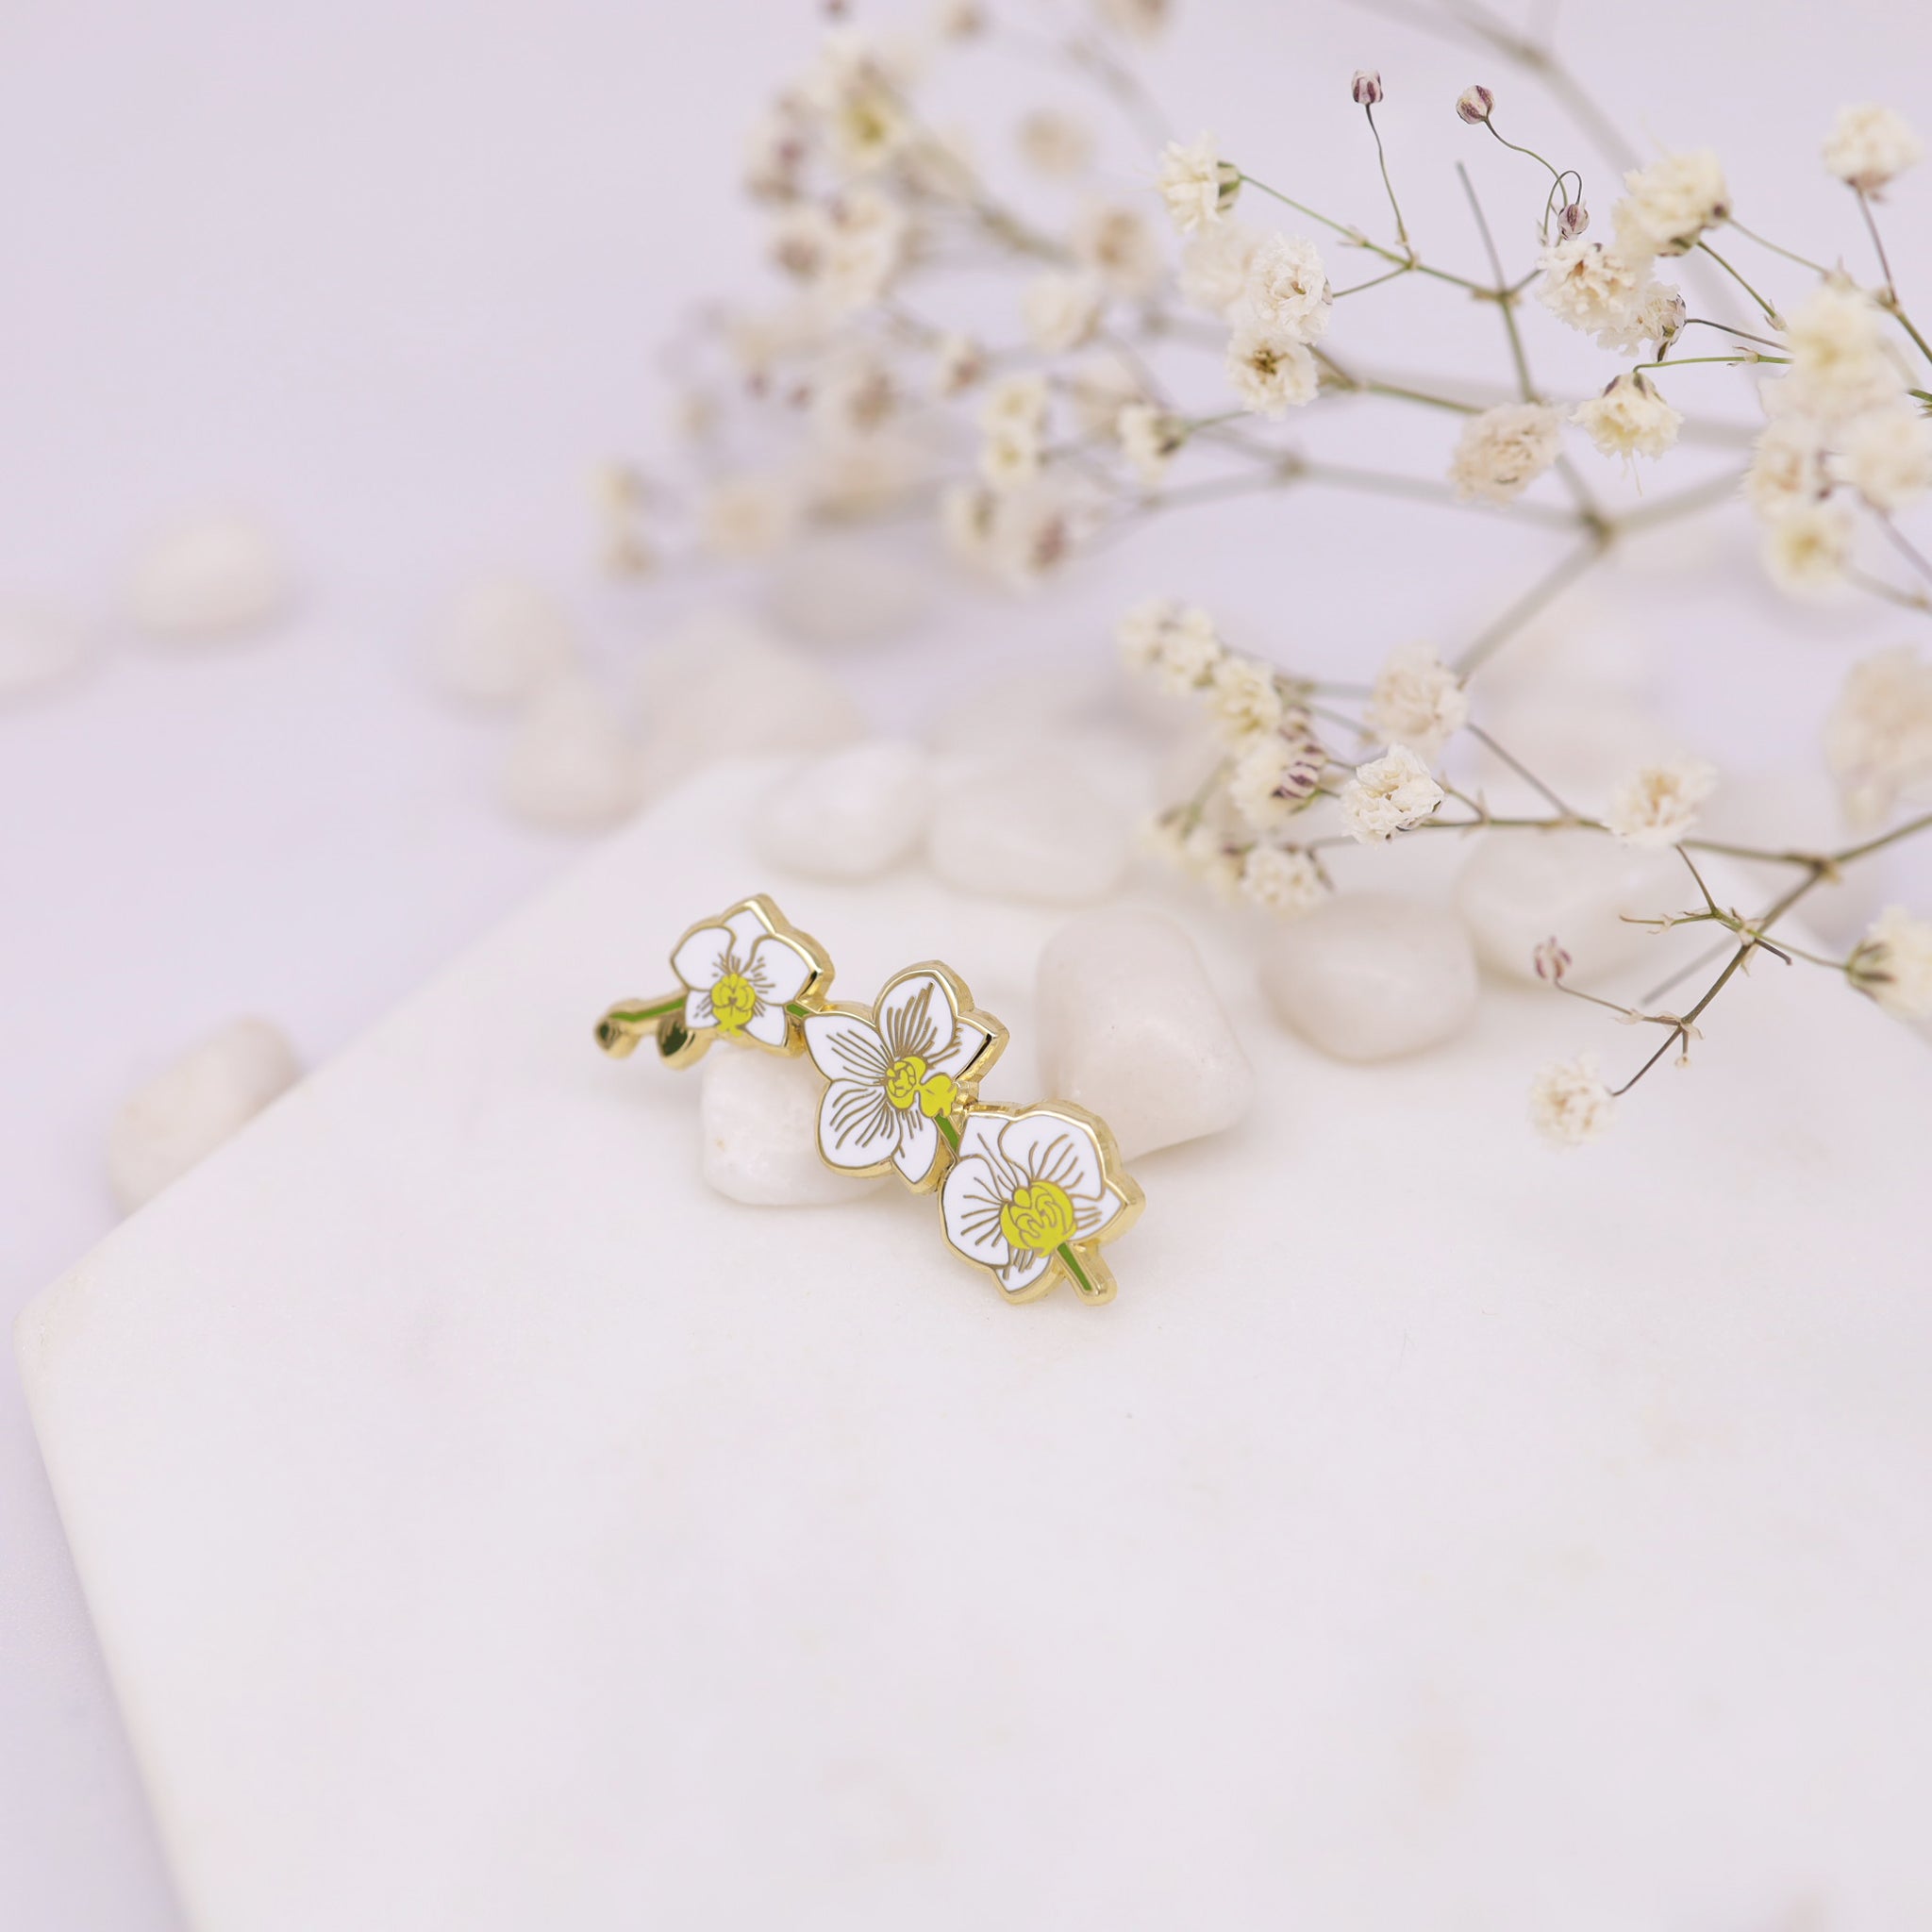 White Orchid Enamel Pin - The Perfect Gift for Flower Enthusiasts